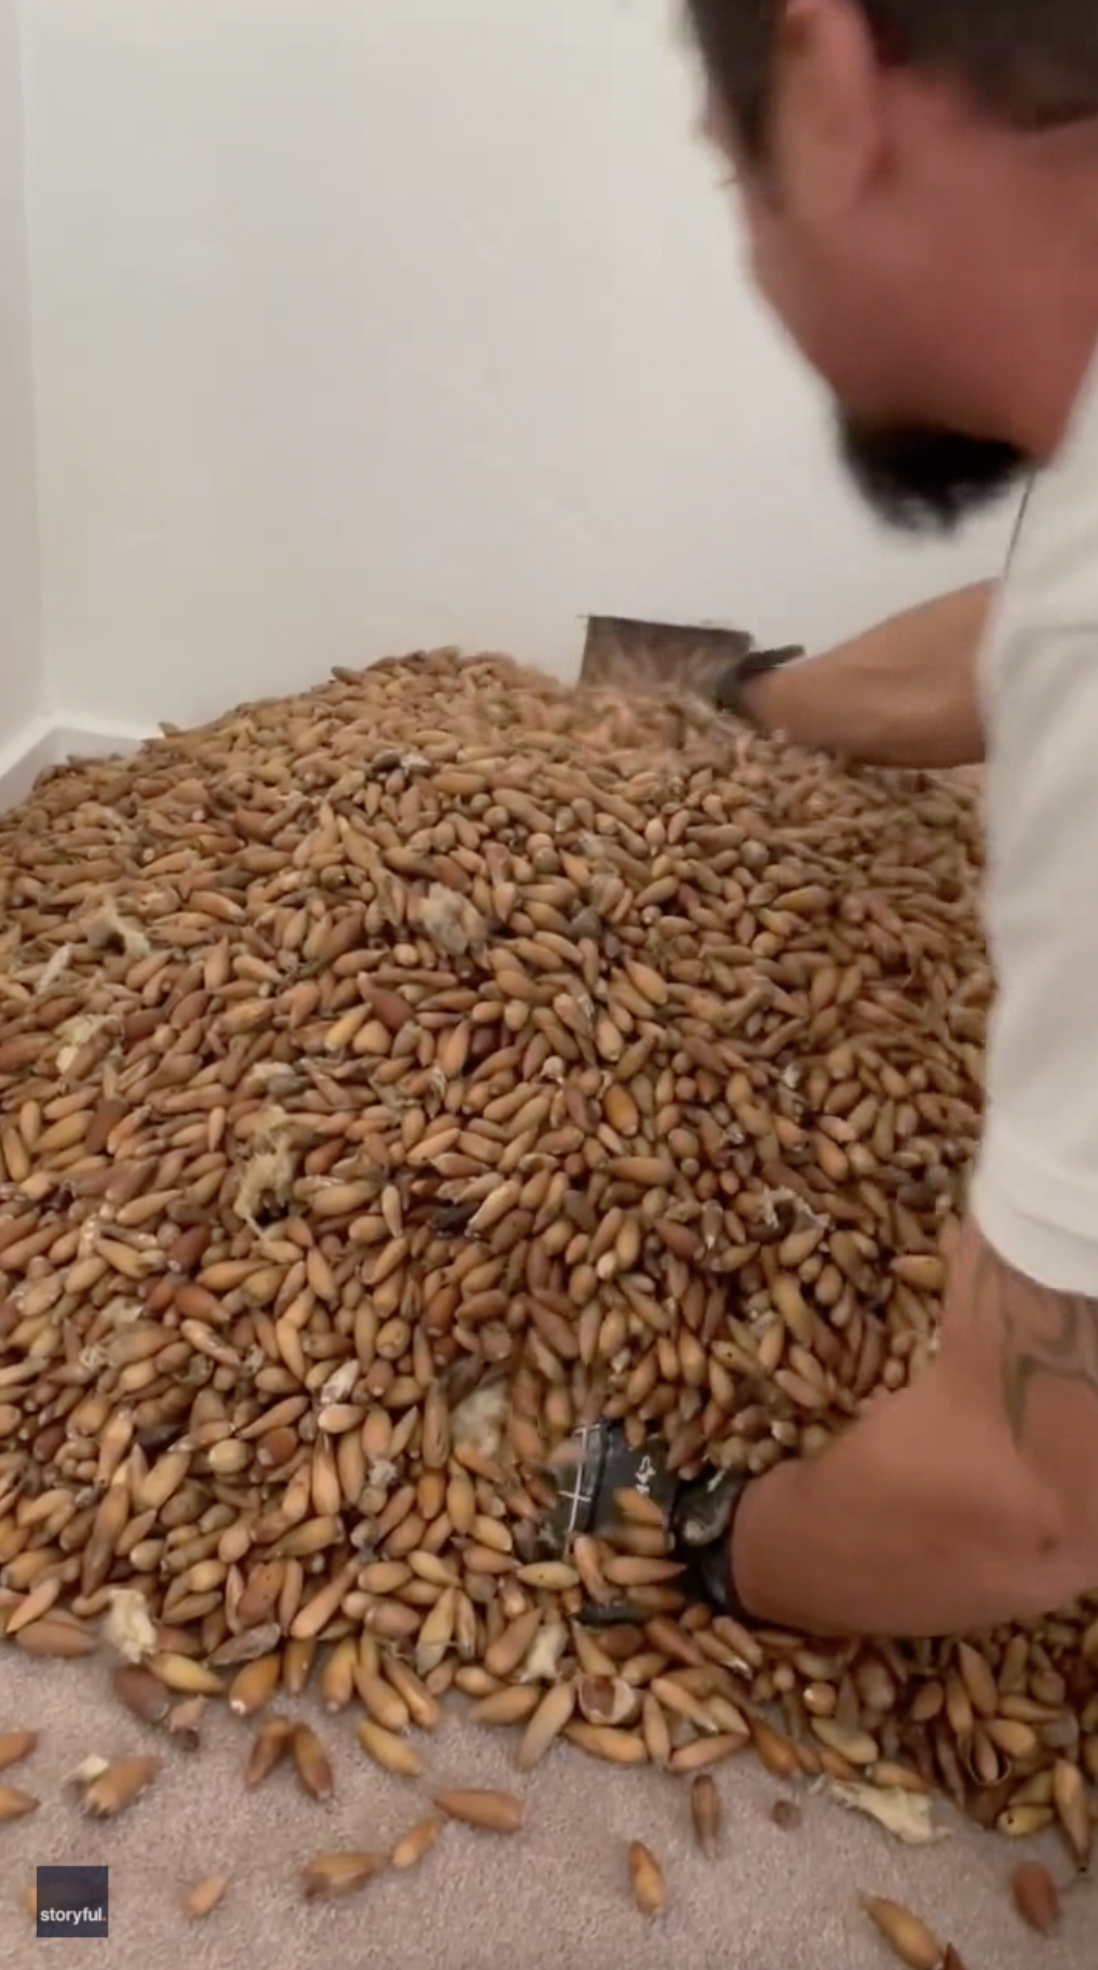 Woodpeckers concealed 700 kilos of acorns in wall of California house: NPR 7